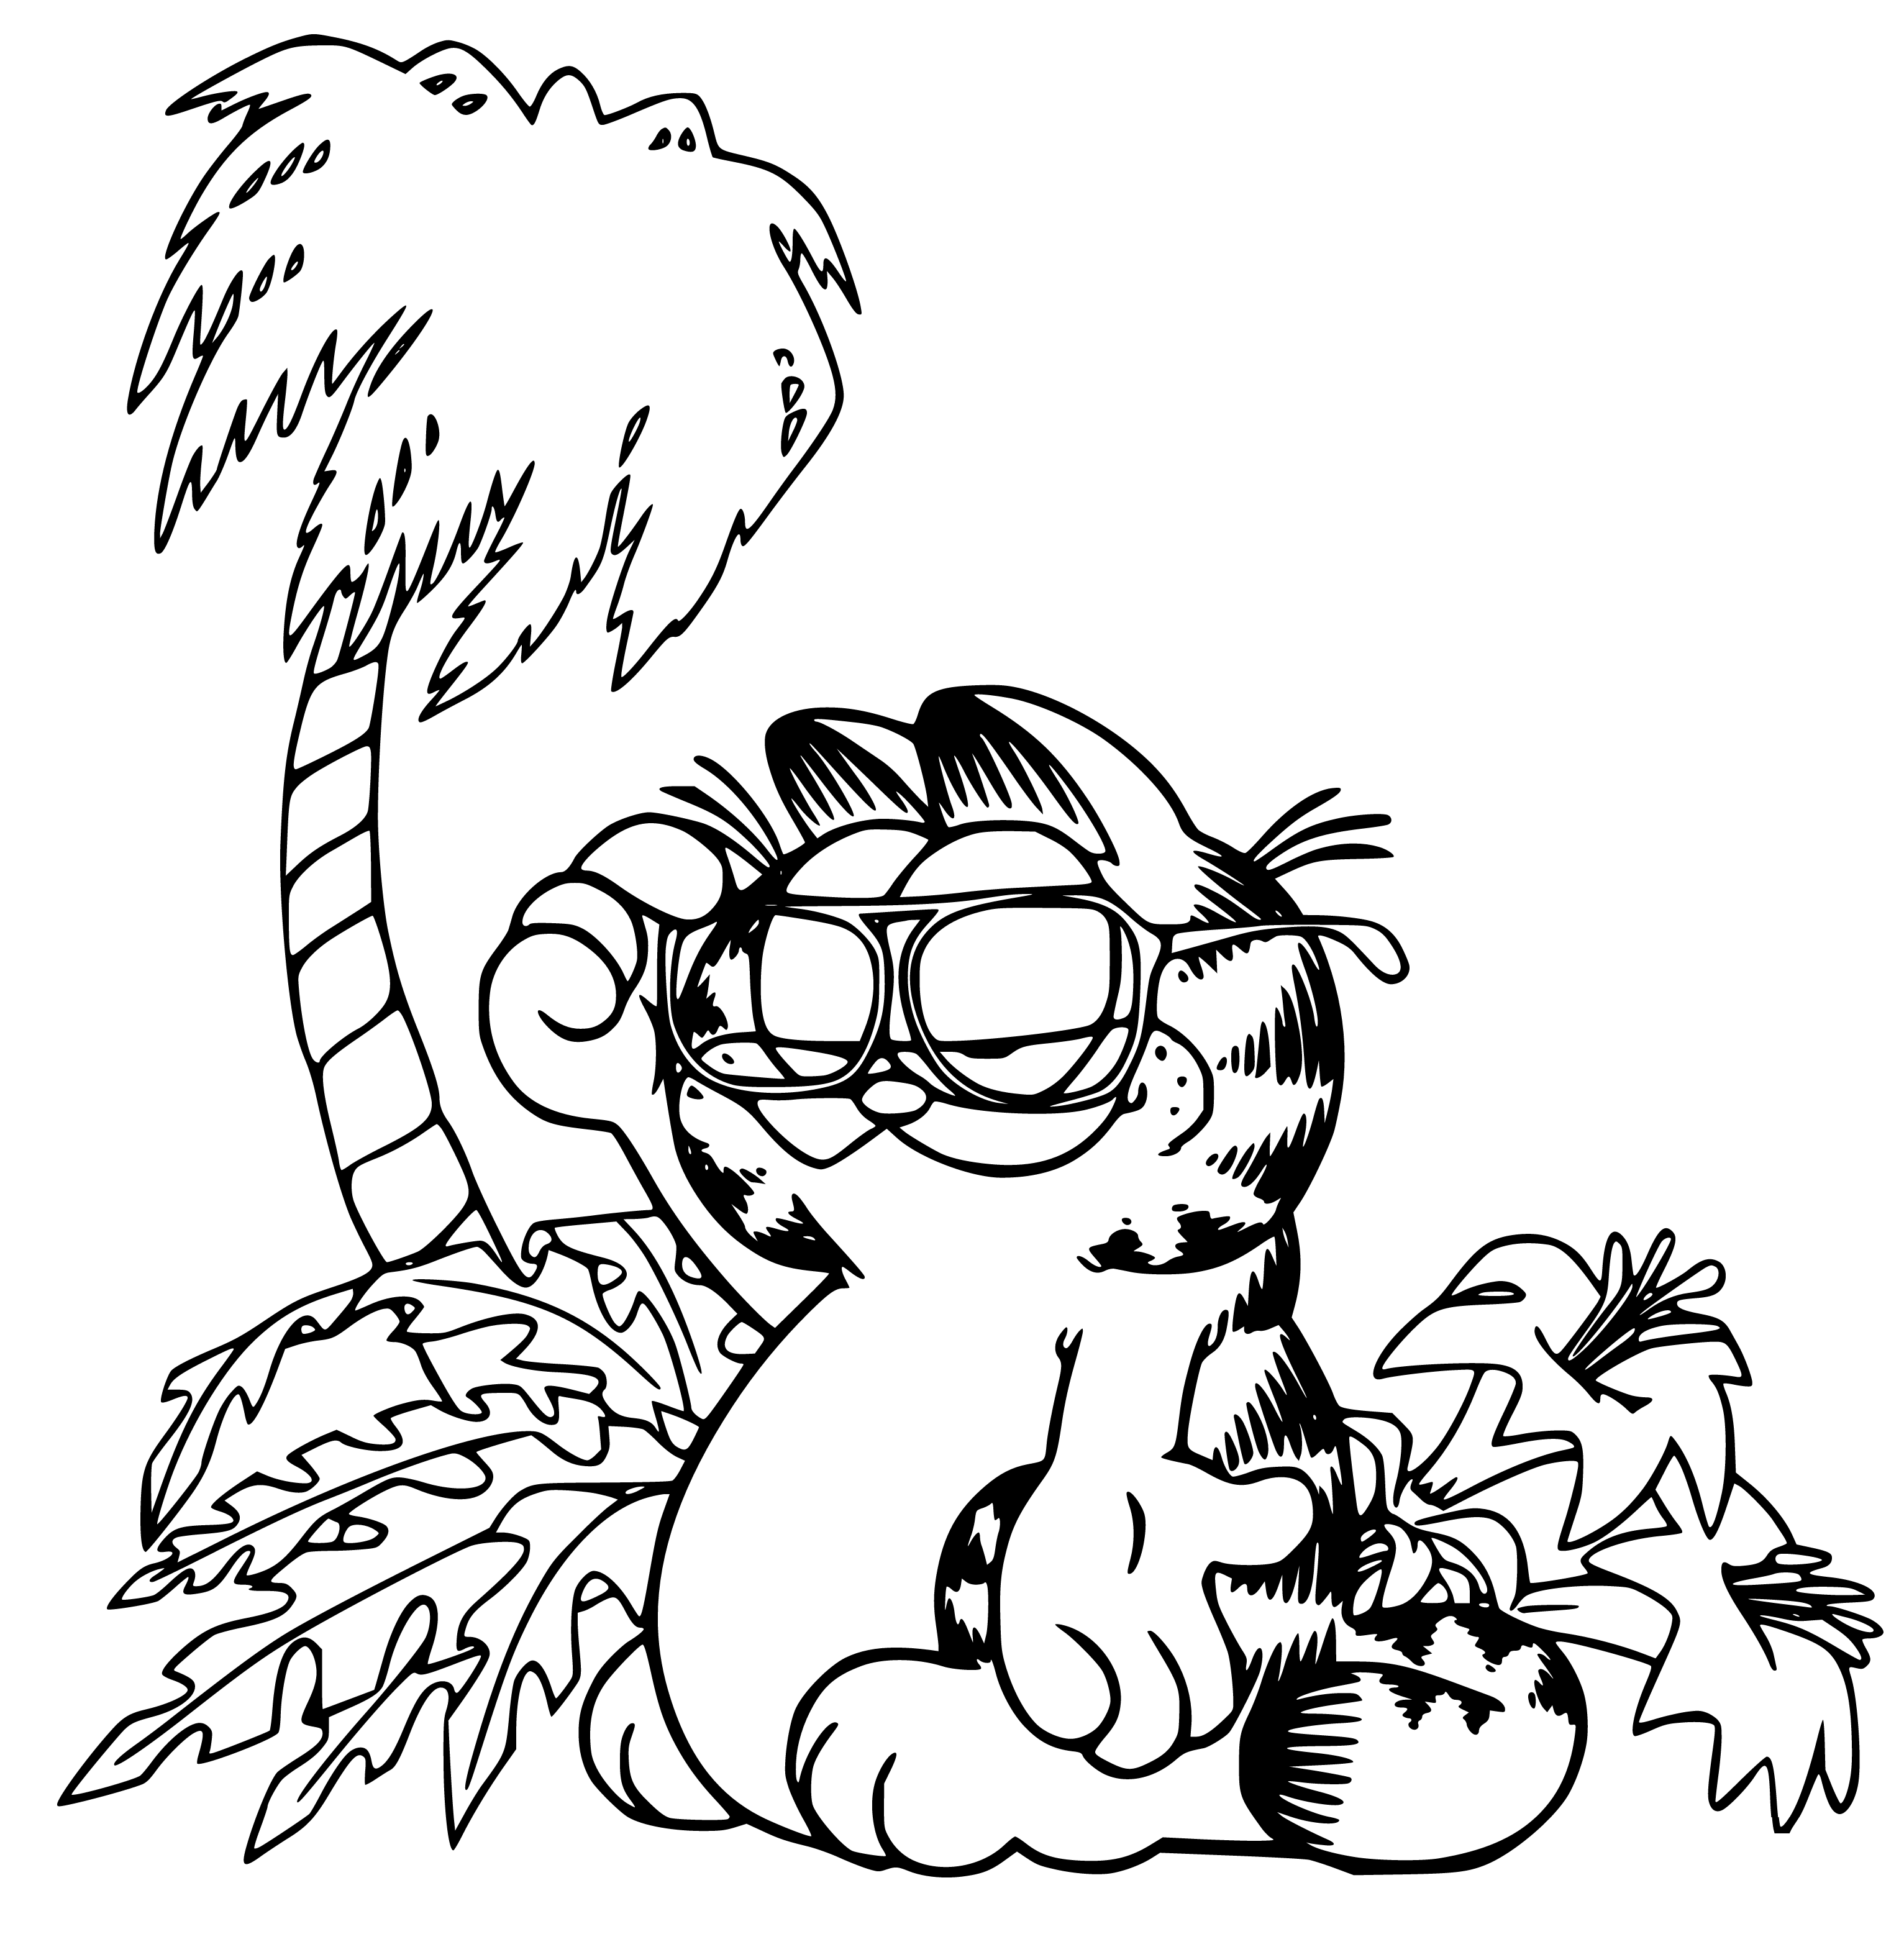 Printable Garfield Holiday Coloring Page for kids.